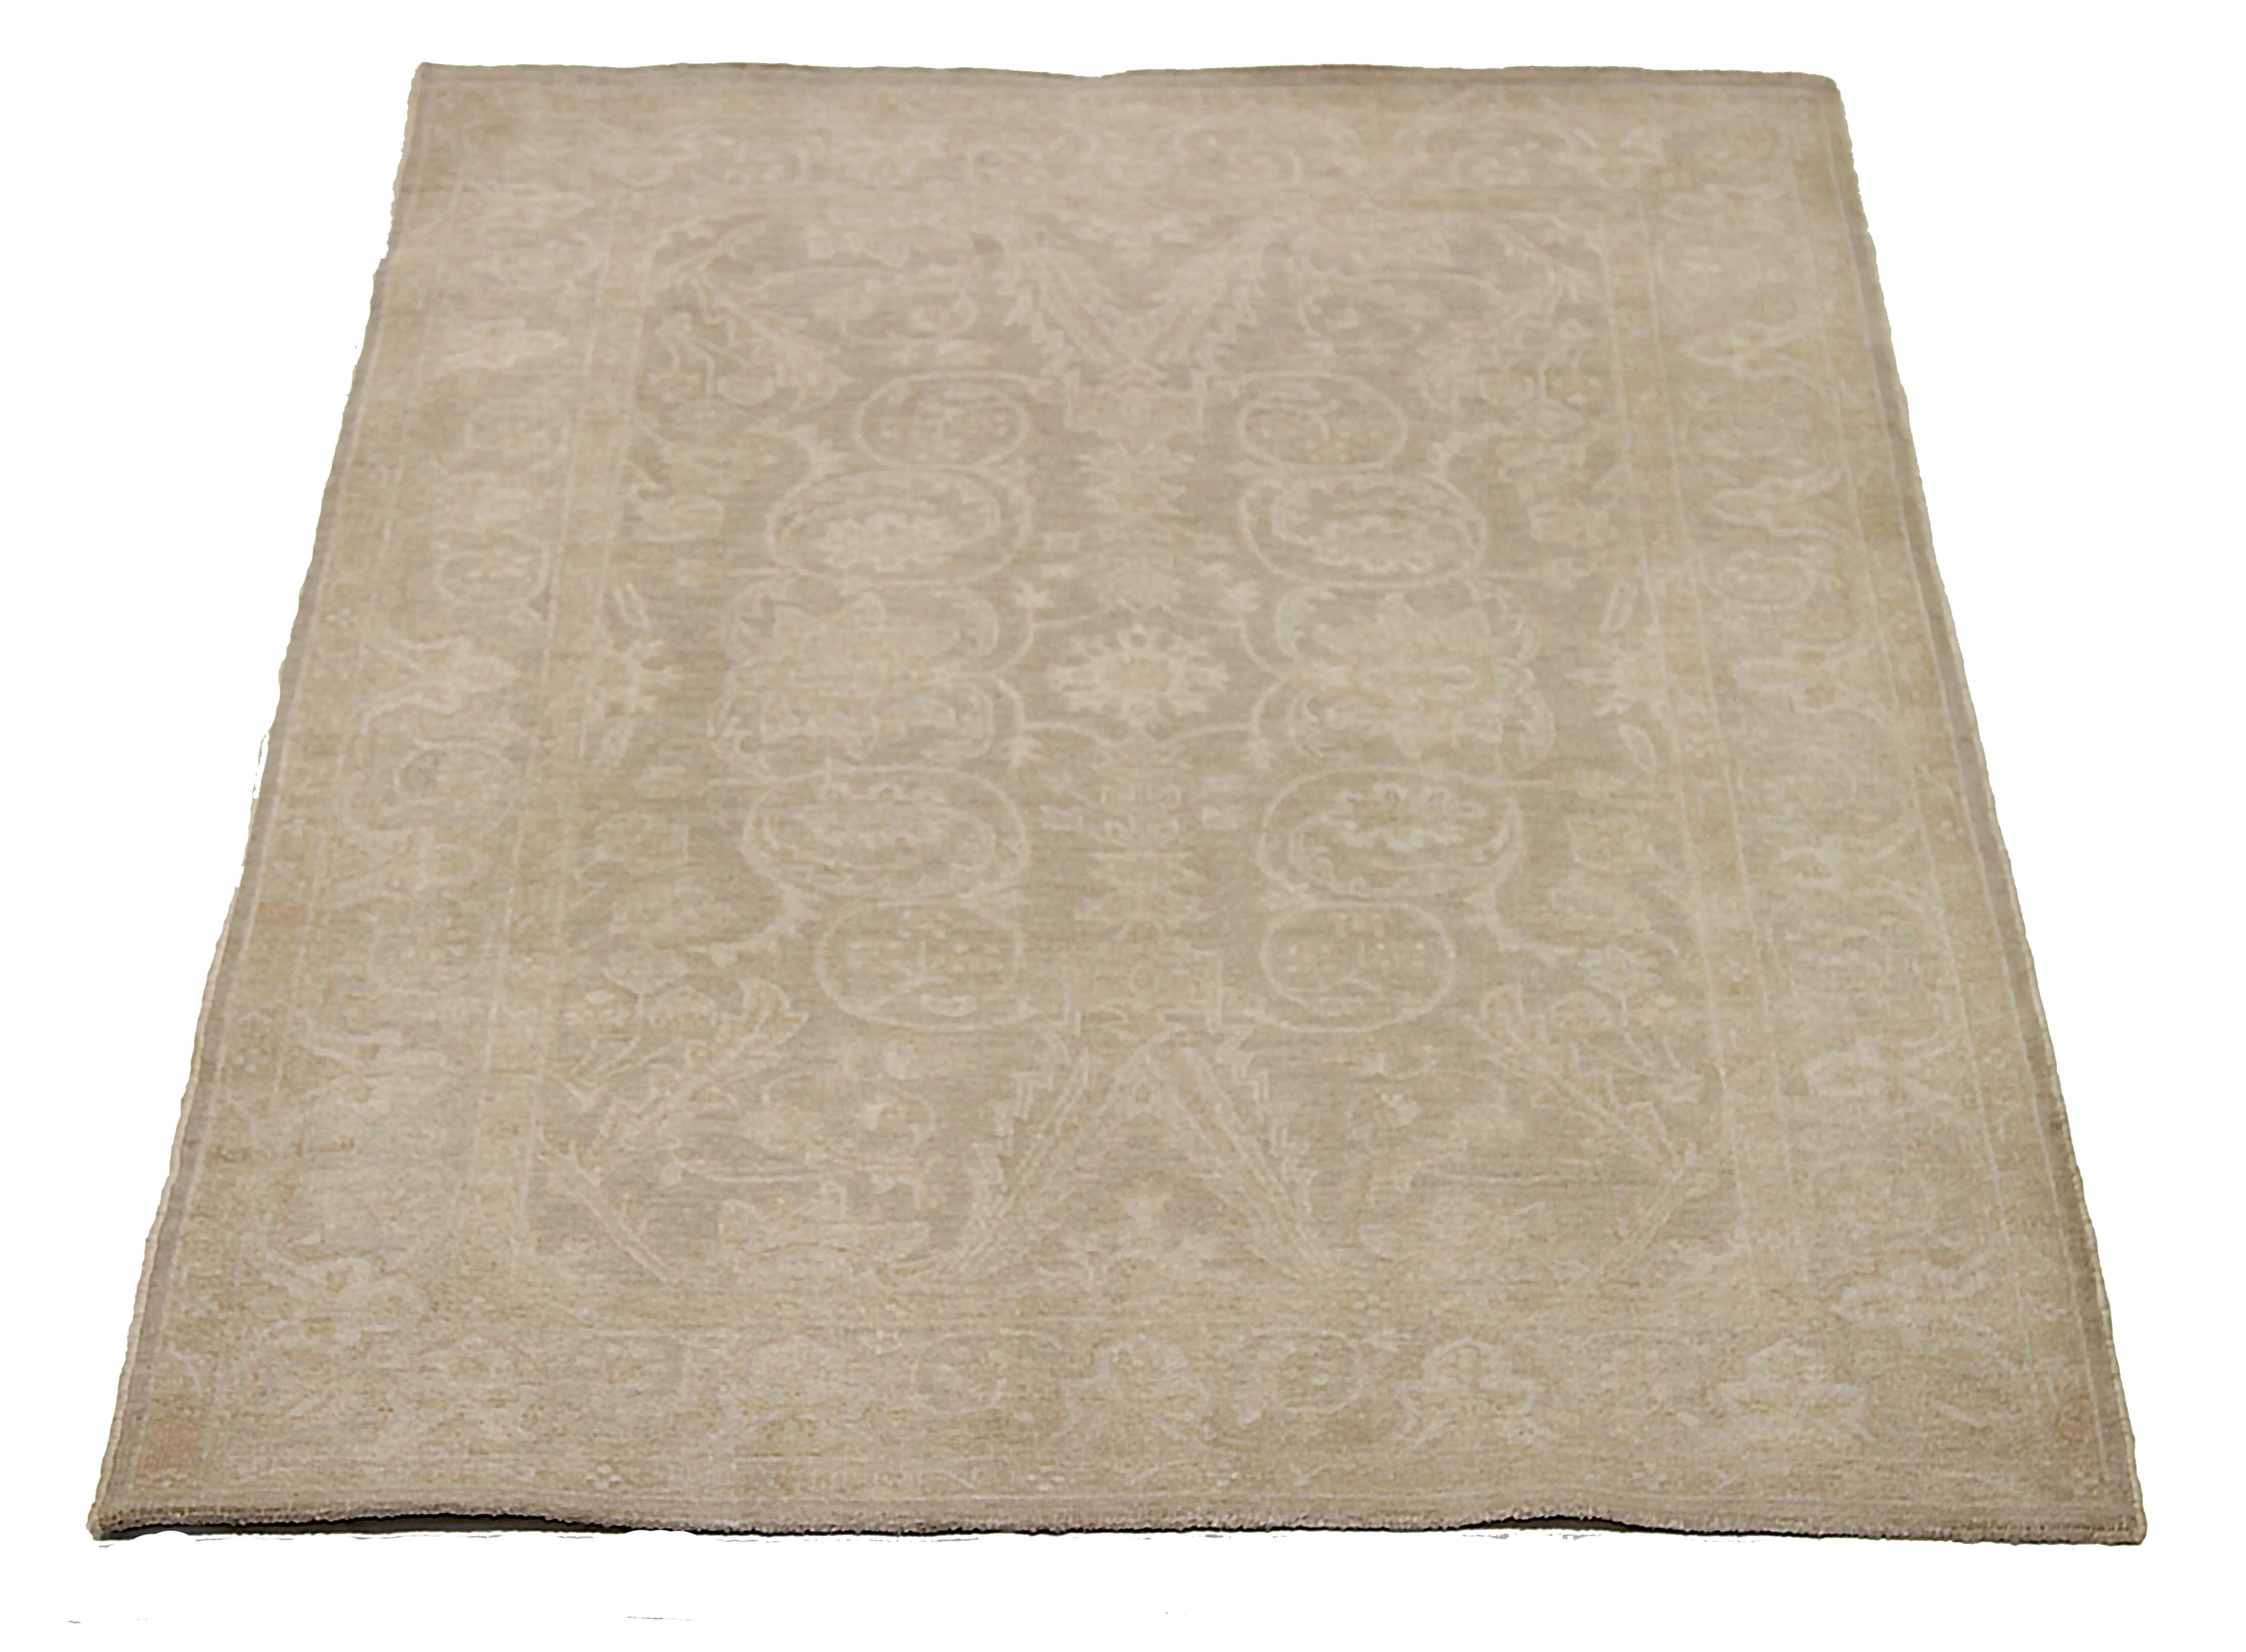 New Afghan area rug handwoven from the finest sheep’s wool. It’s colored with all-natural vegetable dyes that are safe for humans and pets. It’s a traditional Tabriz design woven by expert artisans. In addition to the fine weaving, this rug